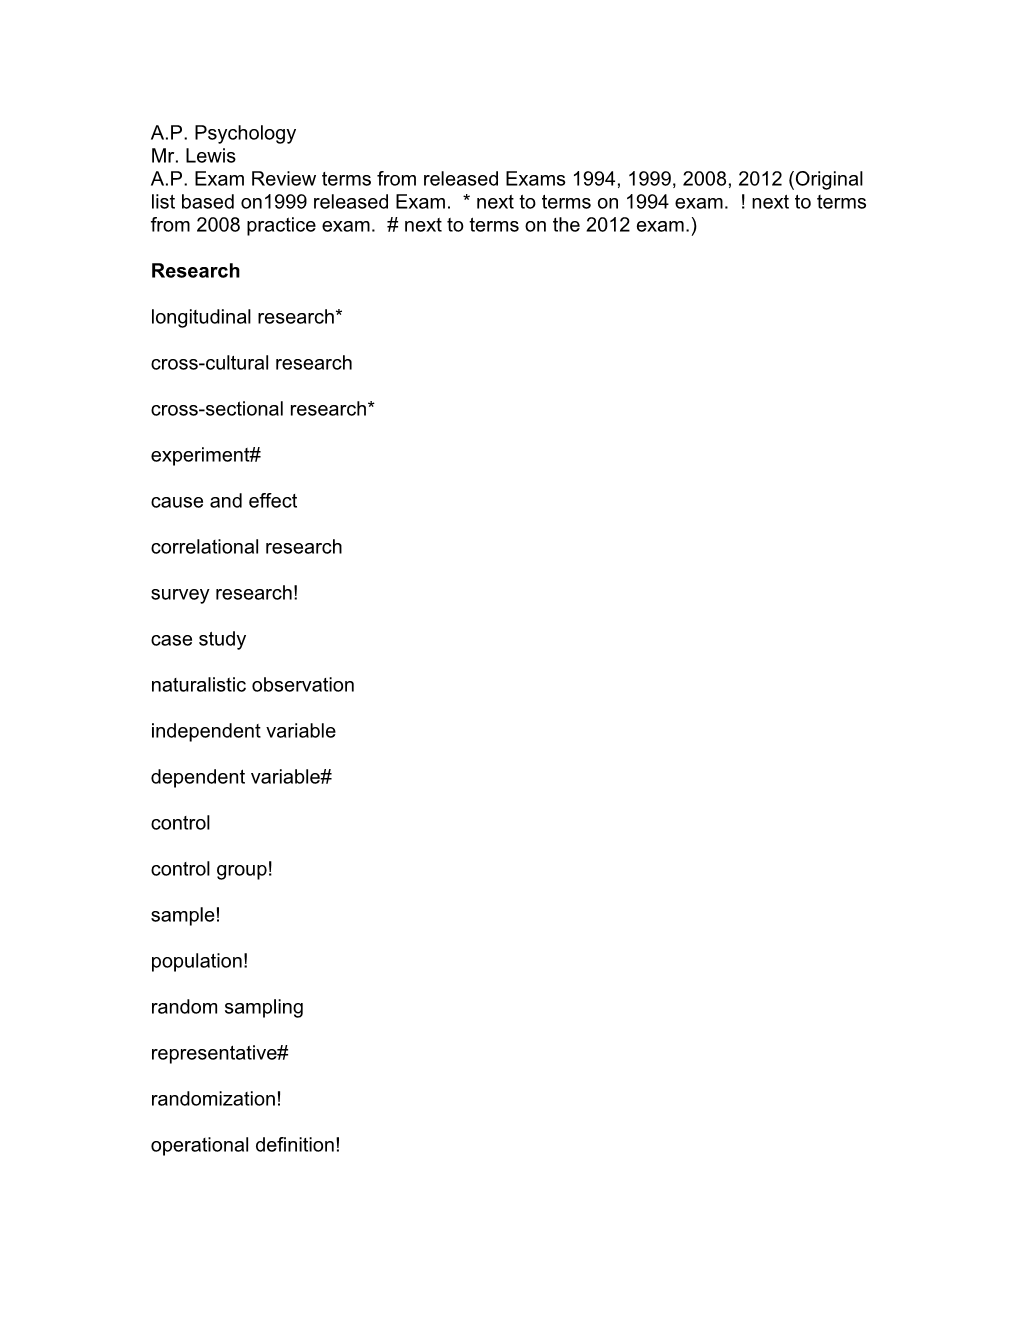 A.P. Exam Review Terms from Released Exams 1994, 1999, 2008, 2012 (Original List Based